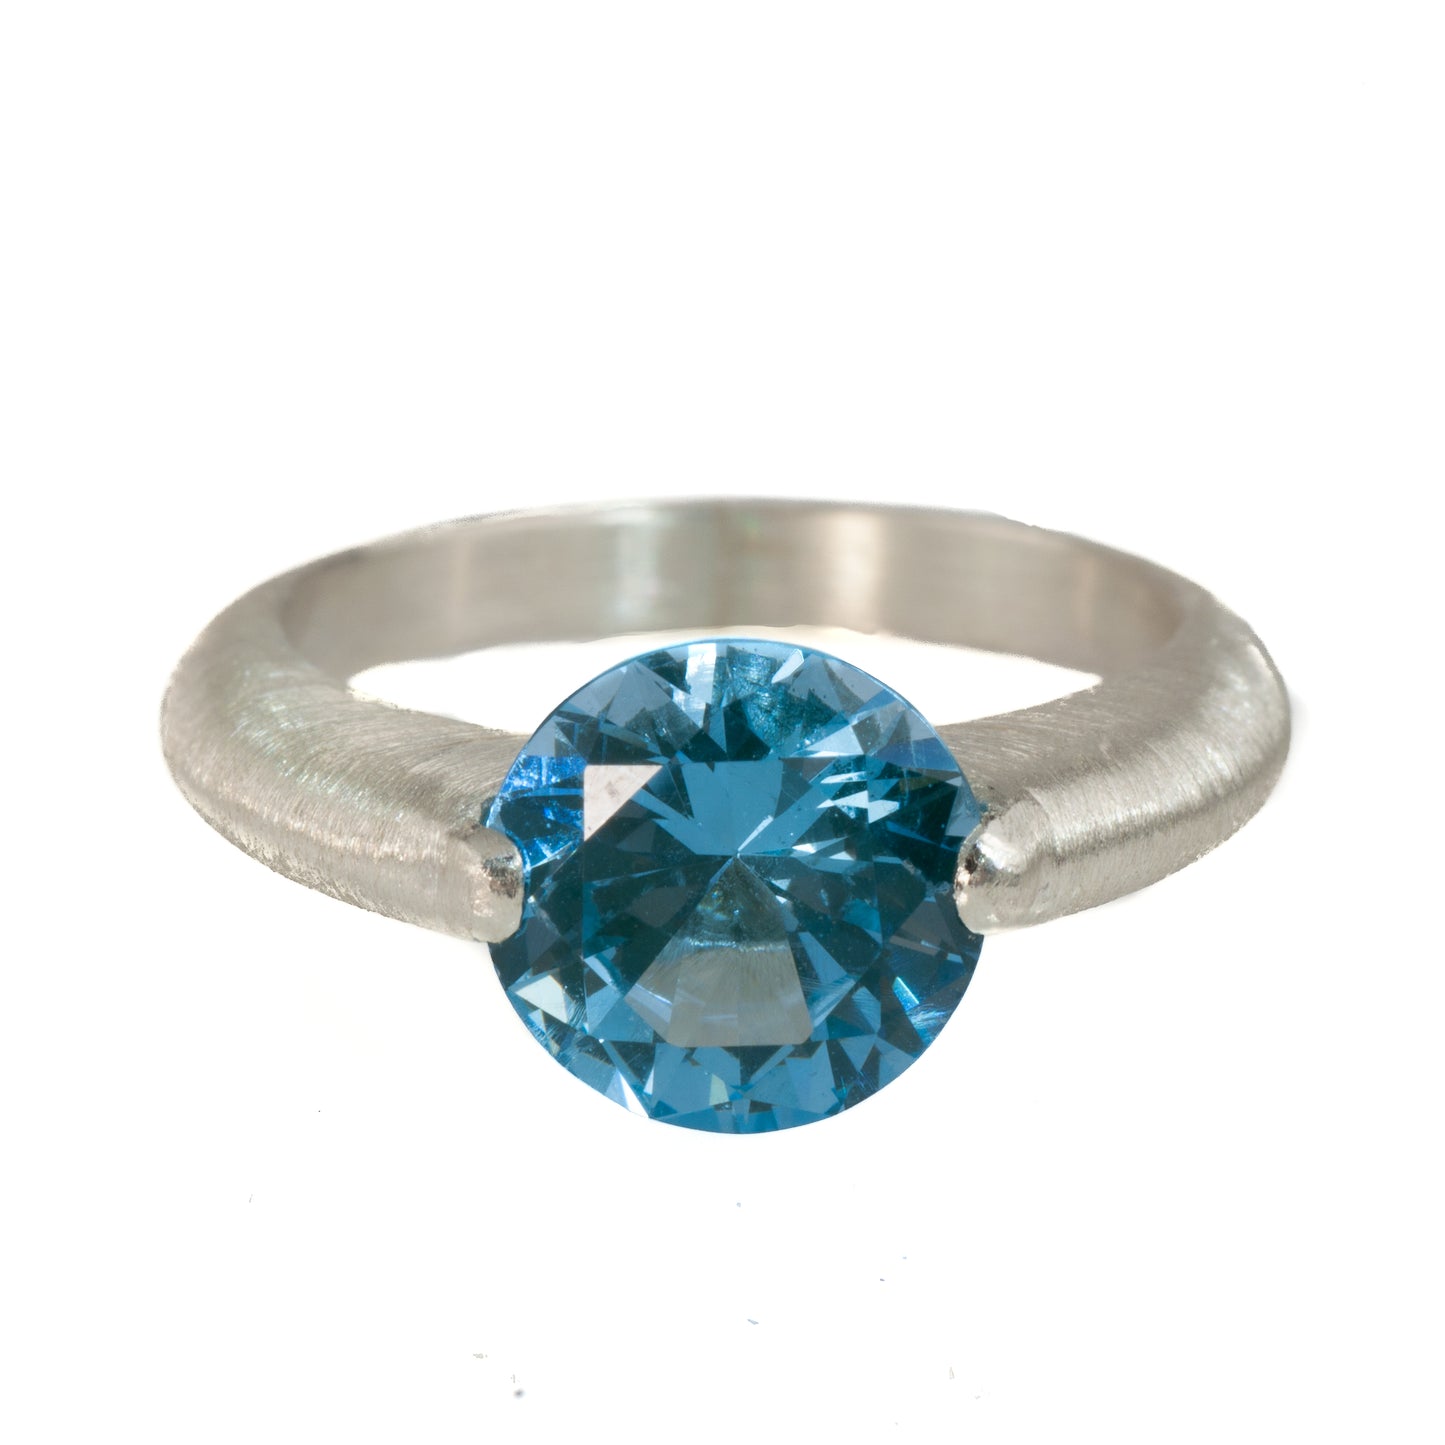 Mysterium Collection Textured Swiss Blue Synthetic Spinel Ring